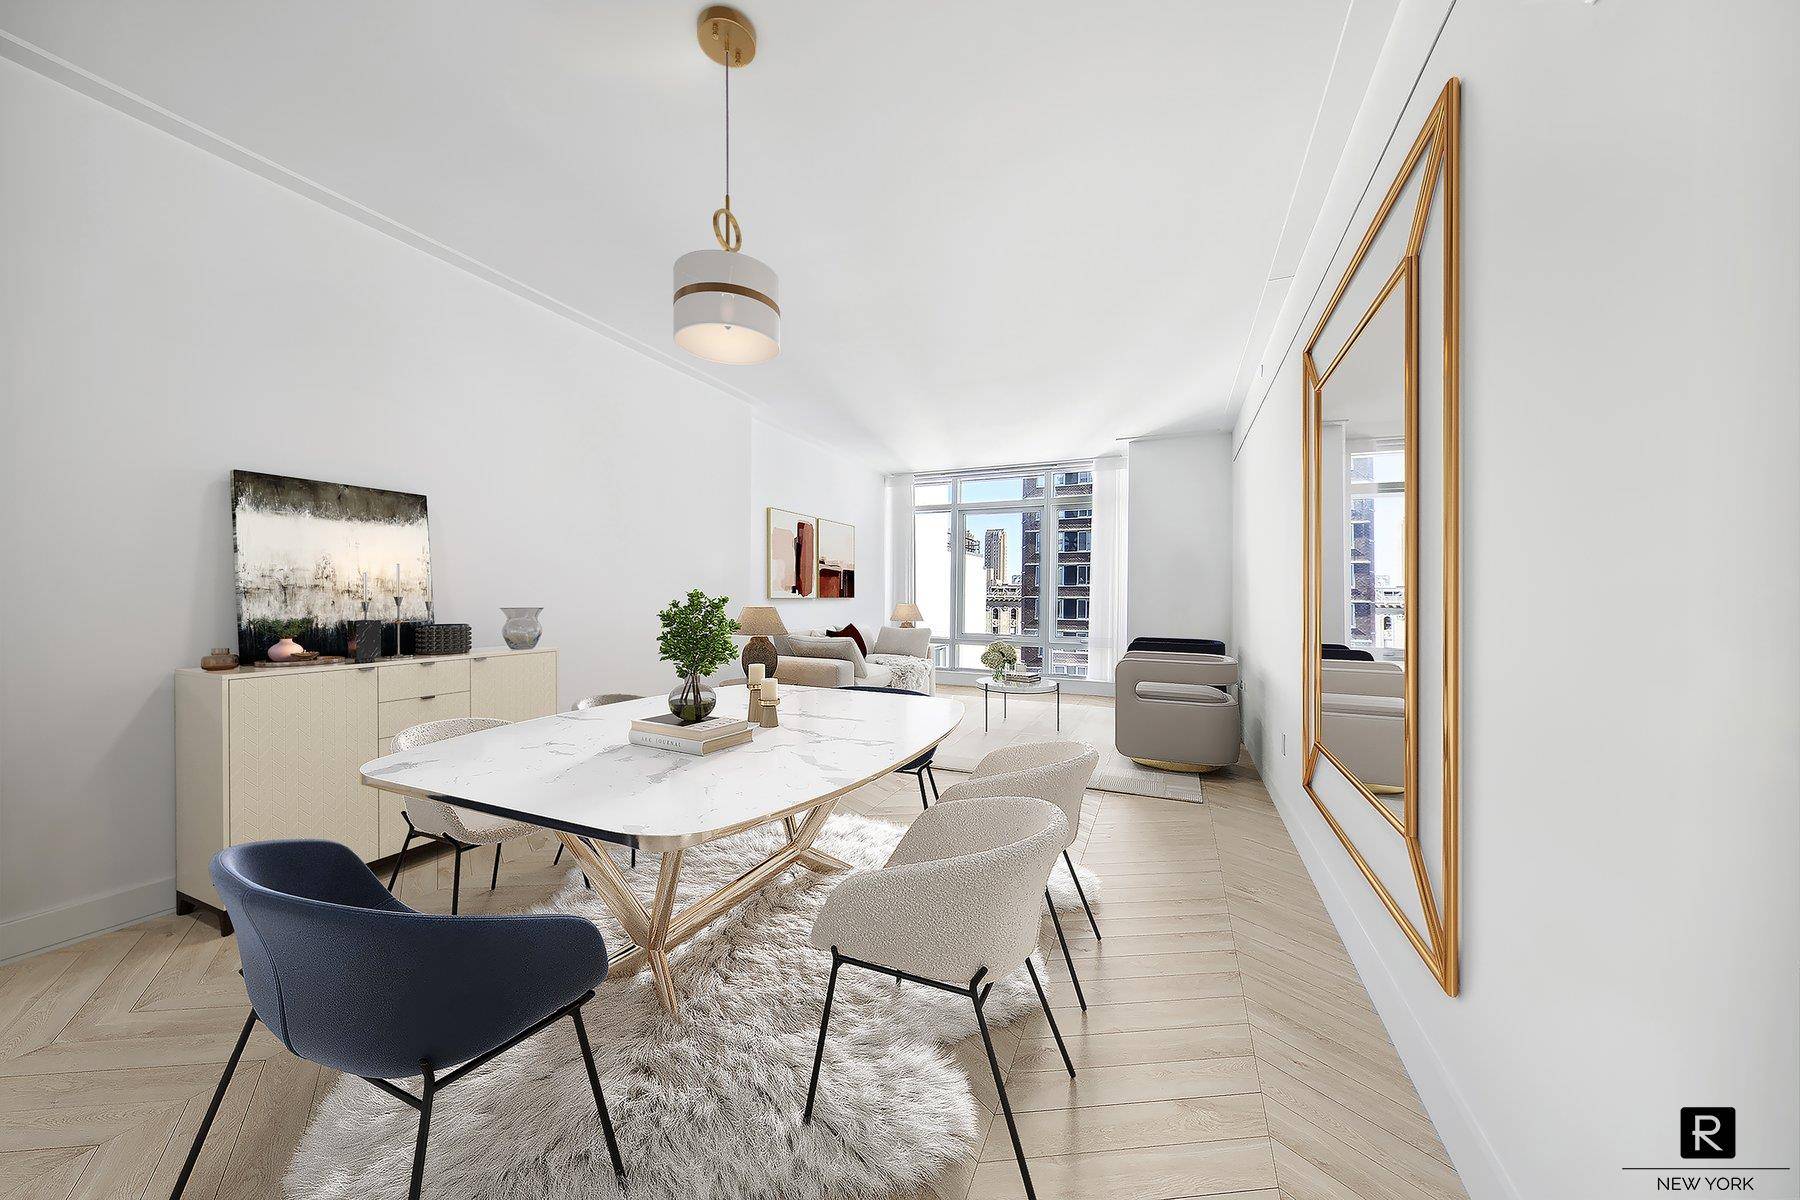 This 2, 434 square foot, three bedroom, three and a half bath condominium features an elegant flow of natural light and space in a gracefully proportioned home.